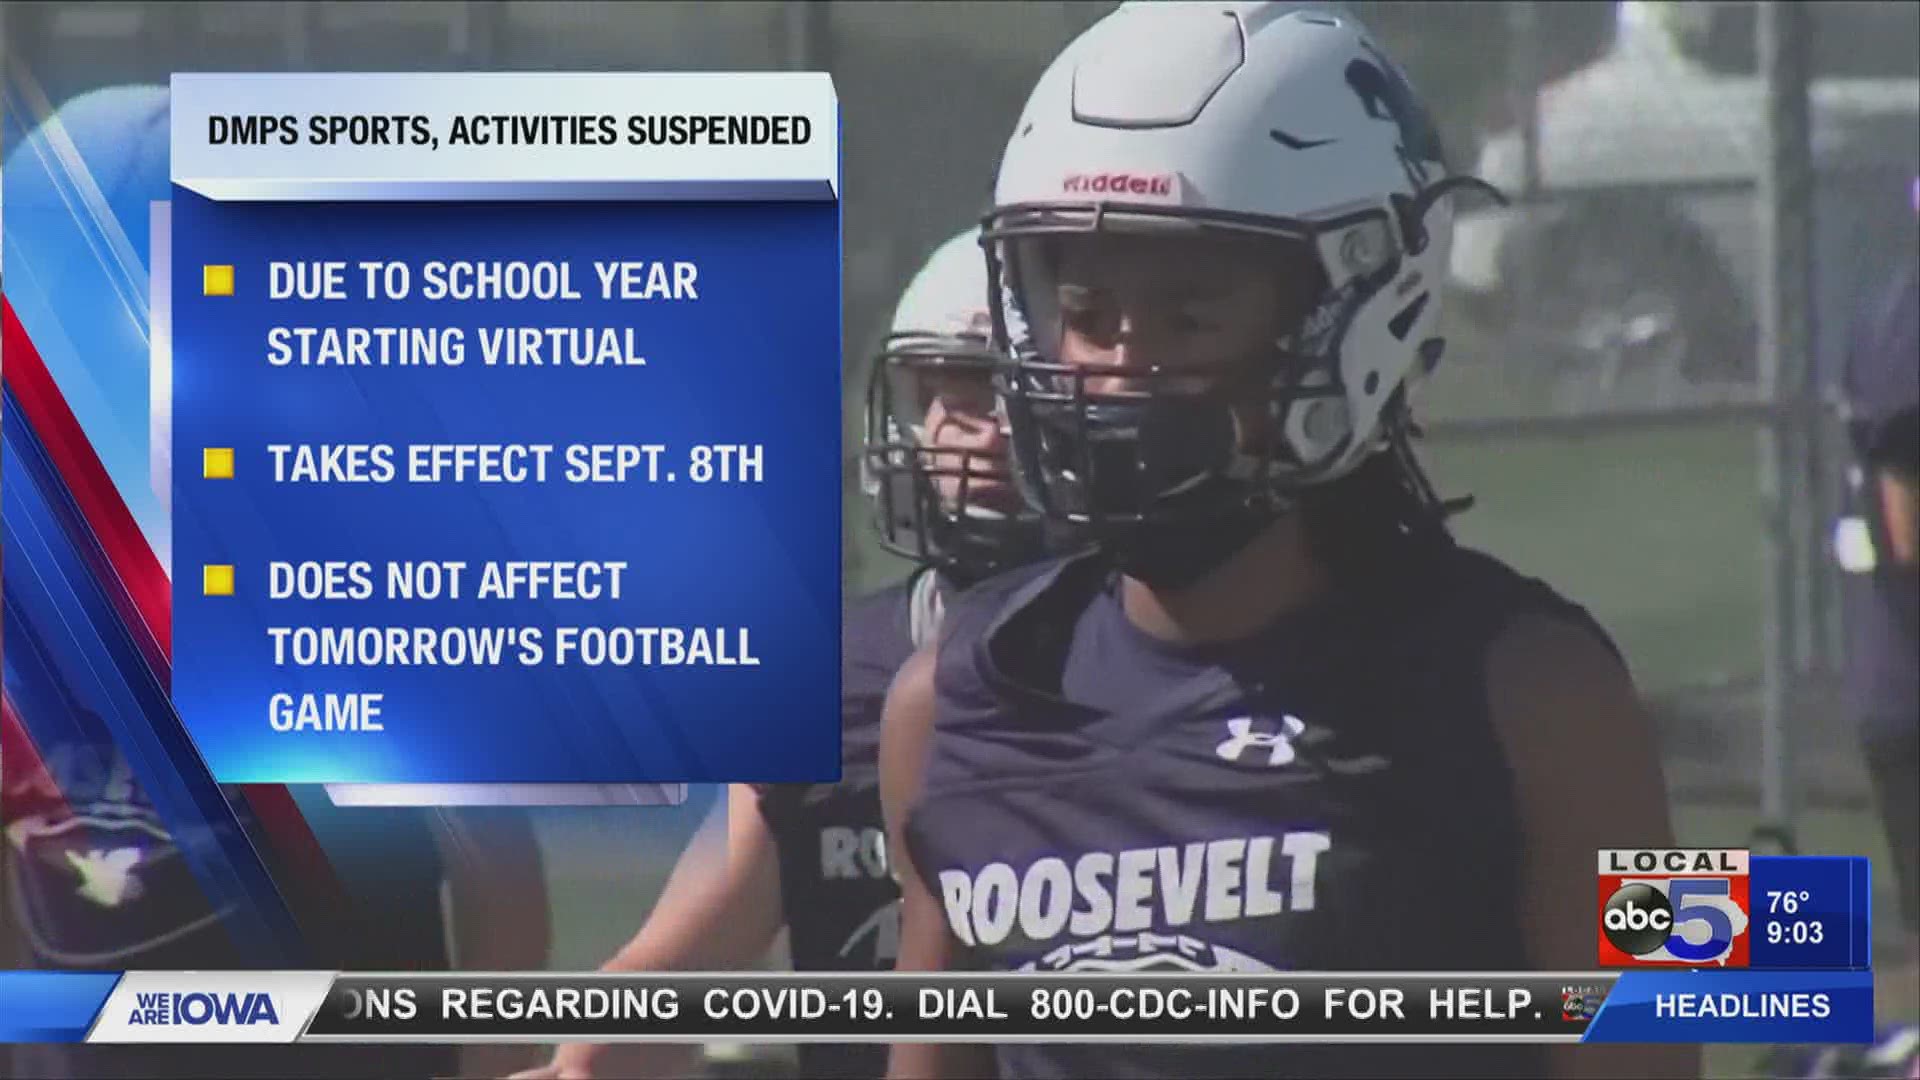 Des Moines Public Schools sports, in-person activities suspended due to virtual learning start